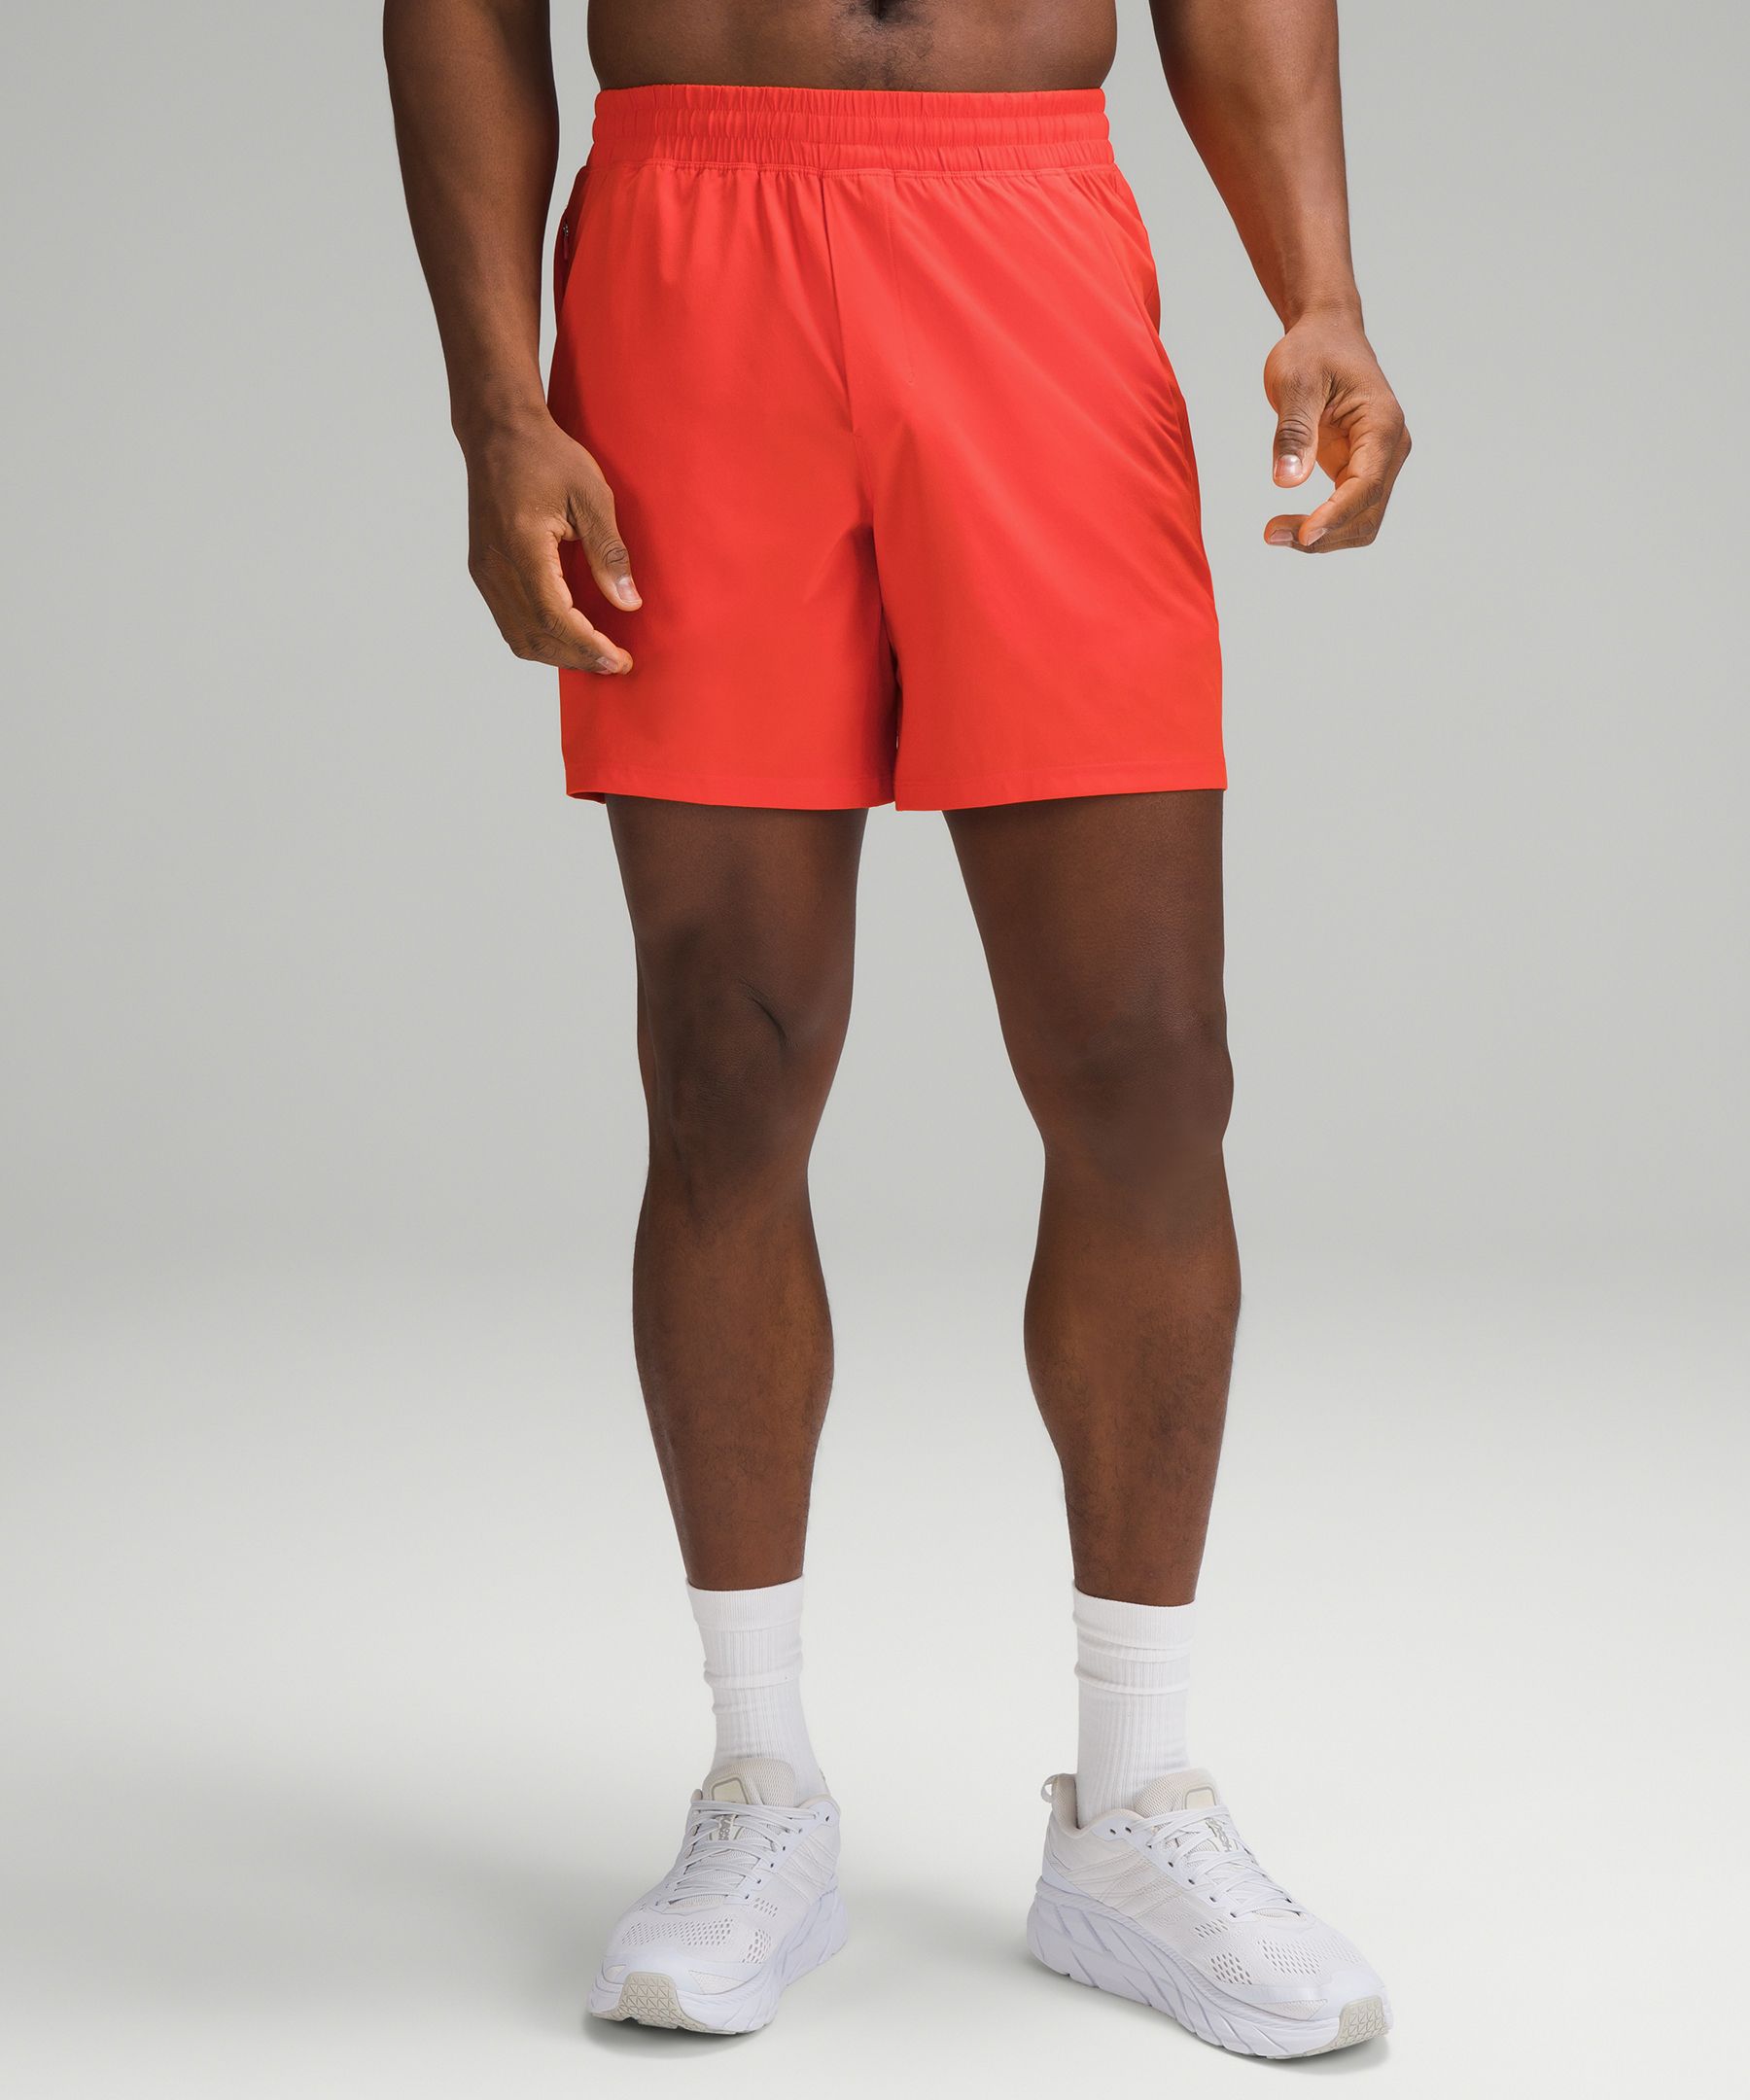 Lululemon Has A Great Deal On Men's Pace Breaker Shorts Right Now - BroBible